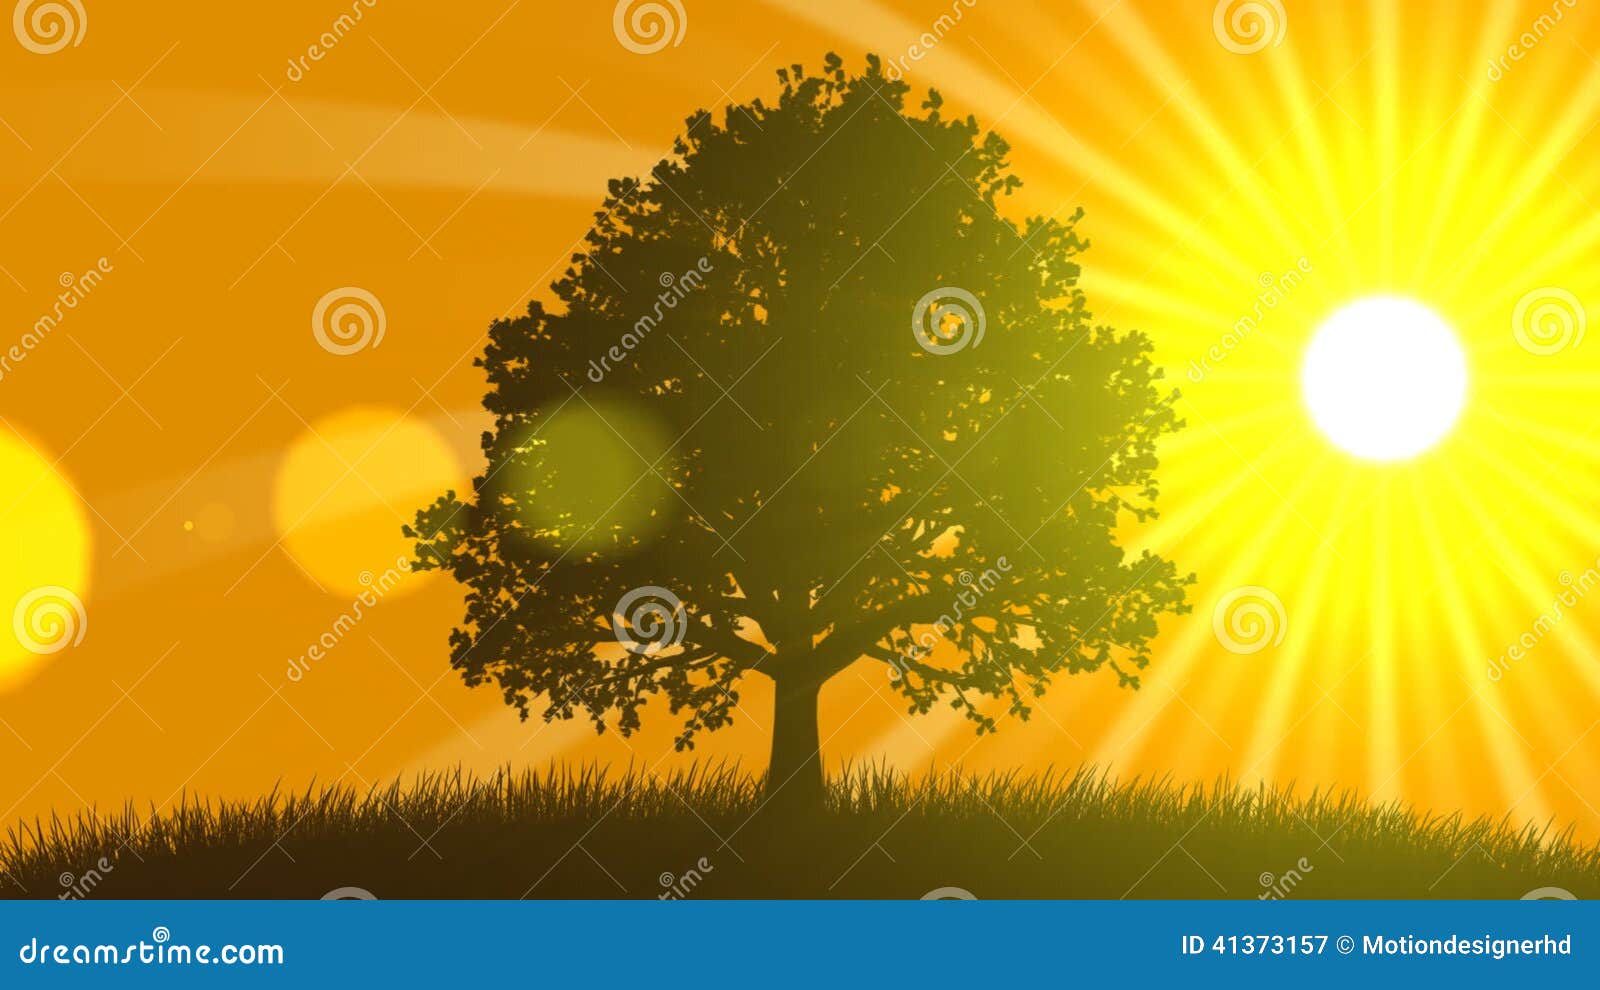 4 Seasons: Summer (Animated Background) Stock Video - Video of summer,  winter: 41373157